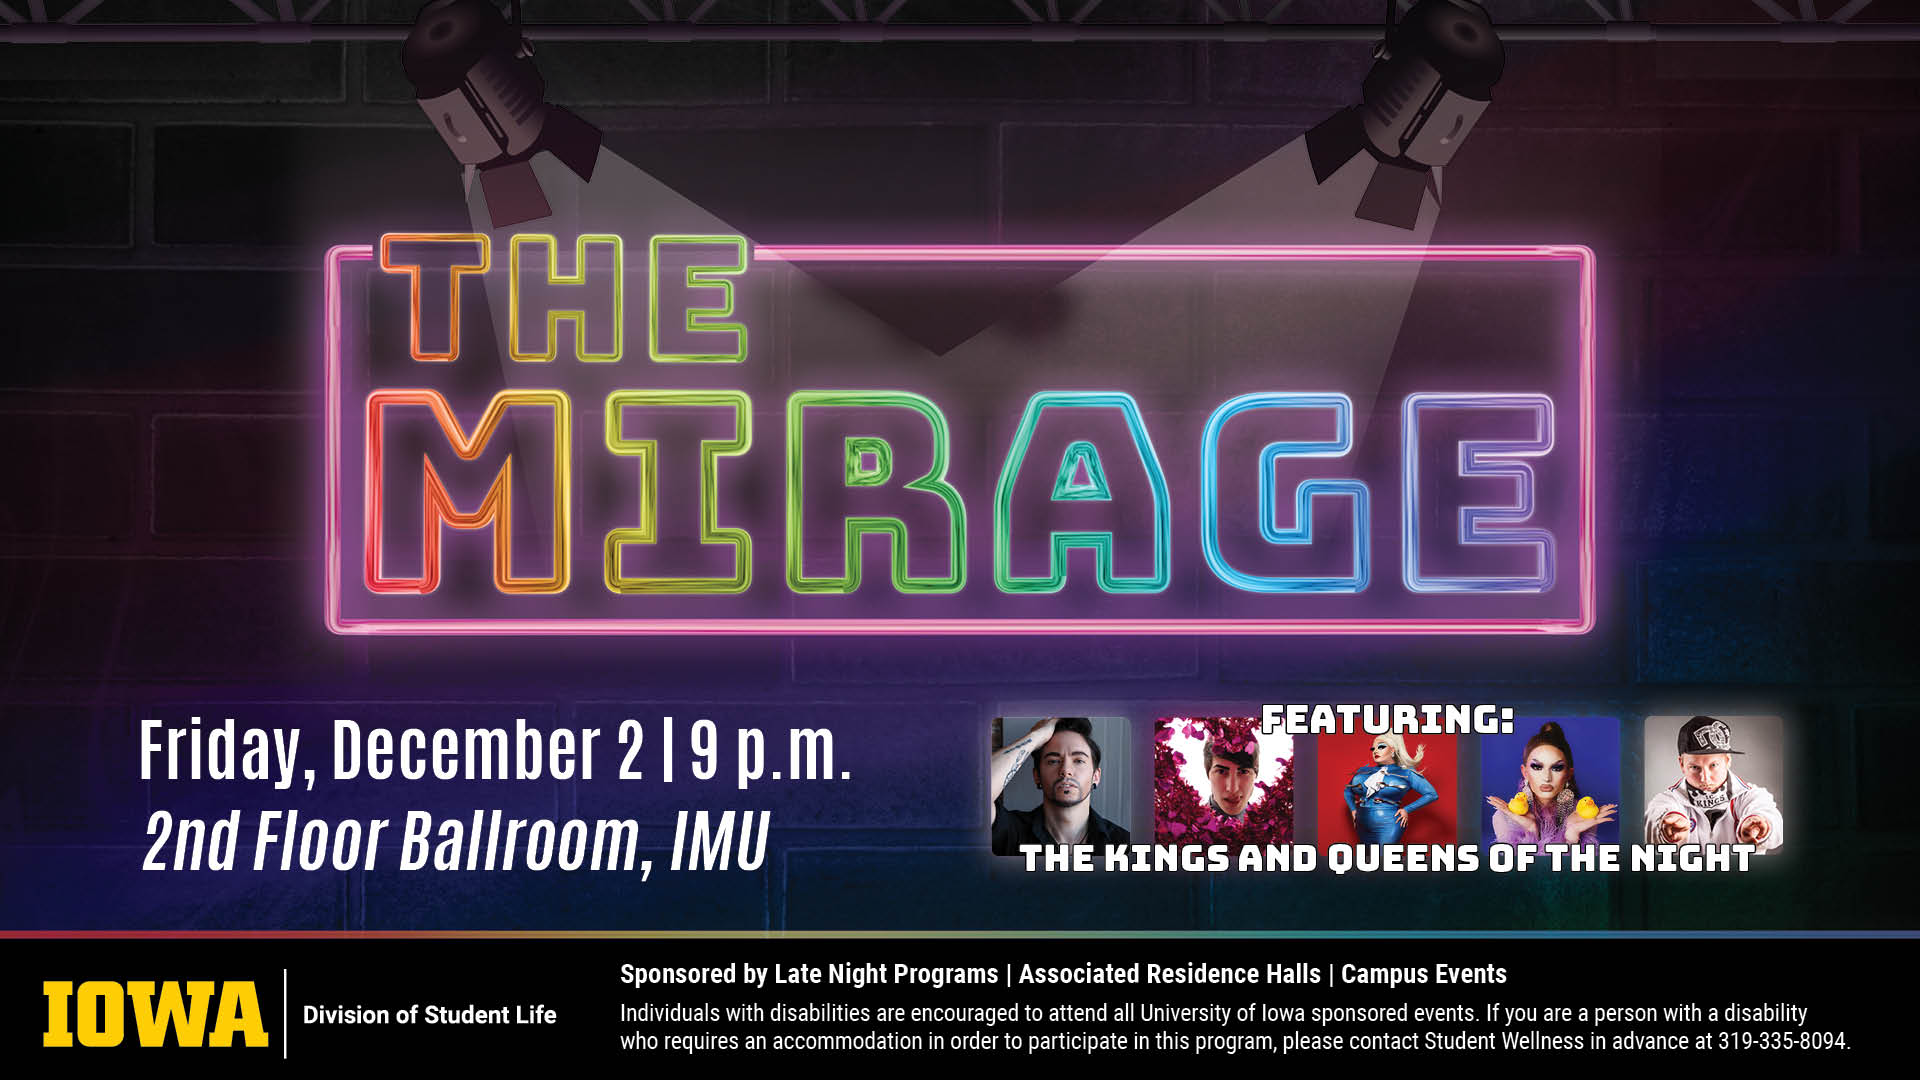 The Mirage Friday, December 2nd at 9pm in the 2nd Floor Ballroom at the IMU